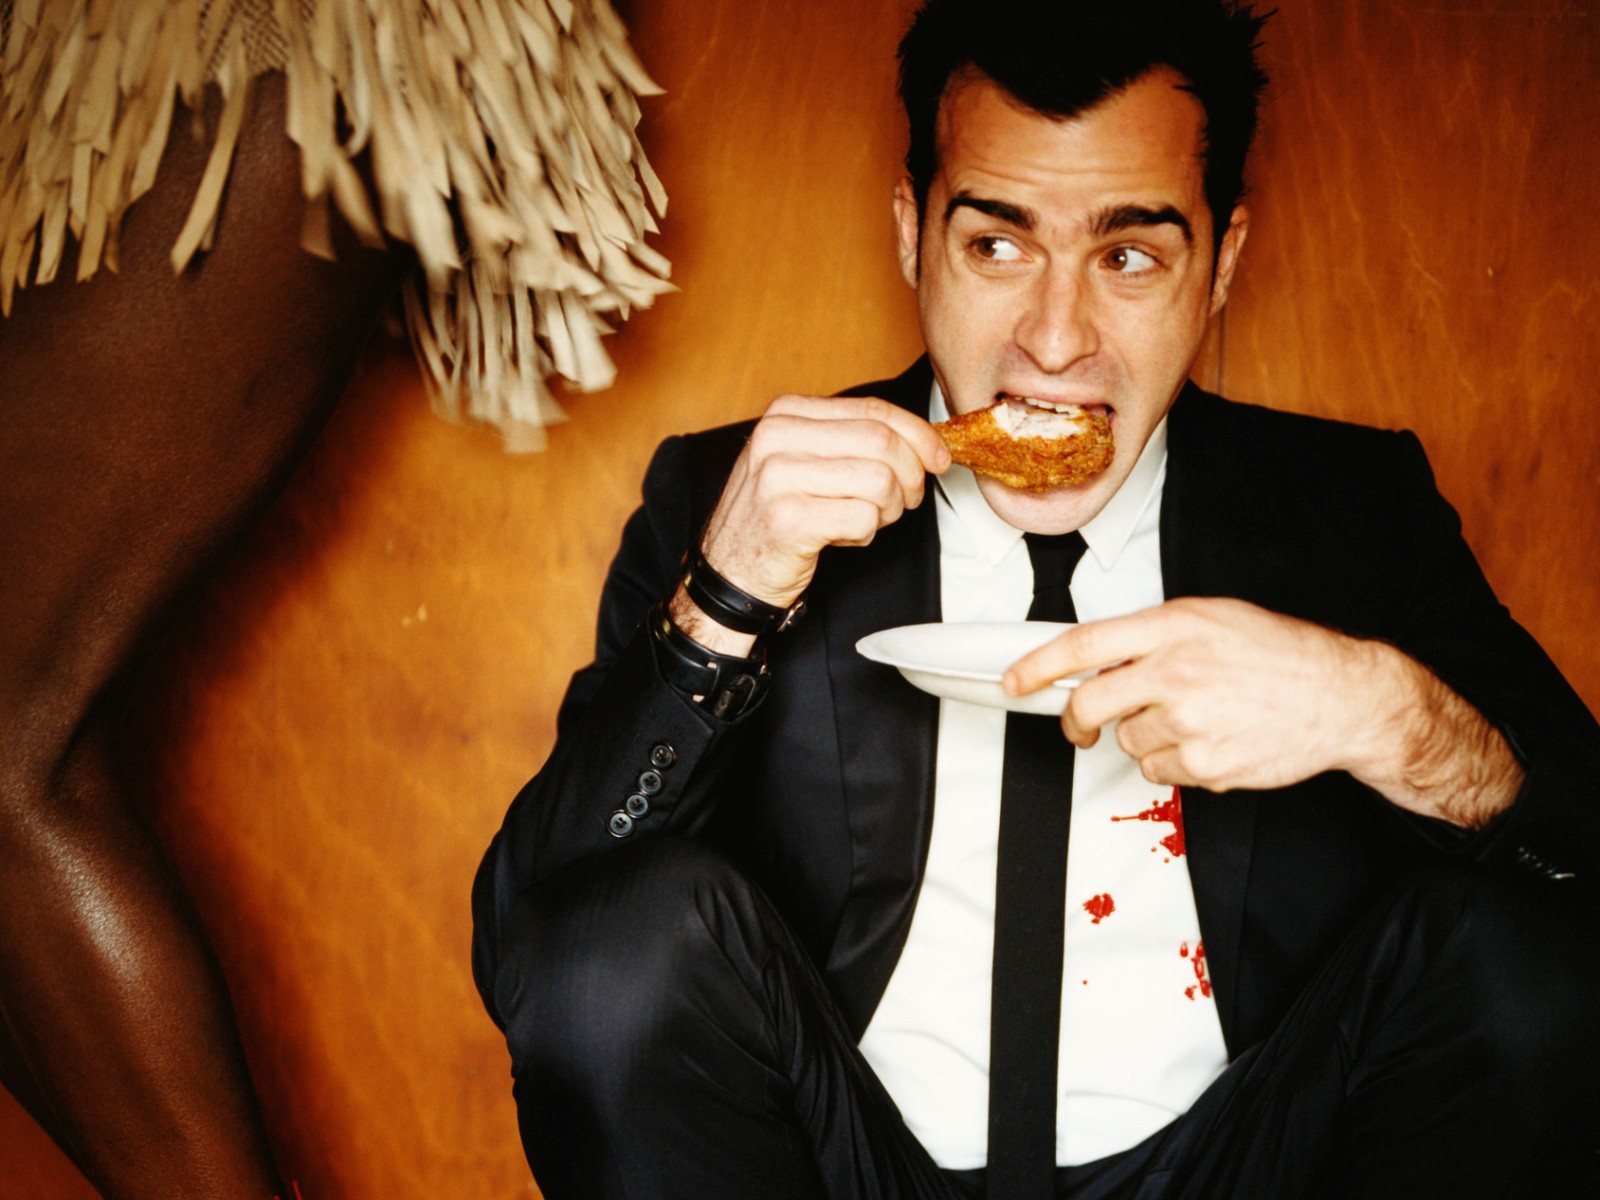 Justin Theroux Image HD Wallpaper And Background